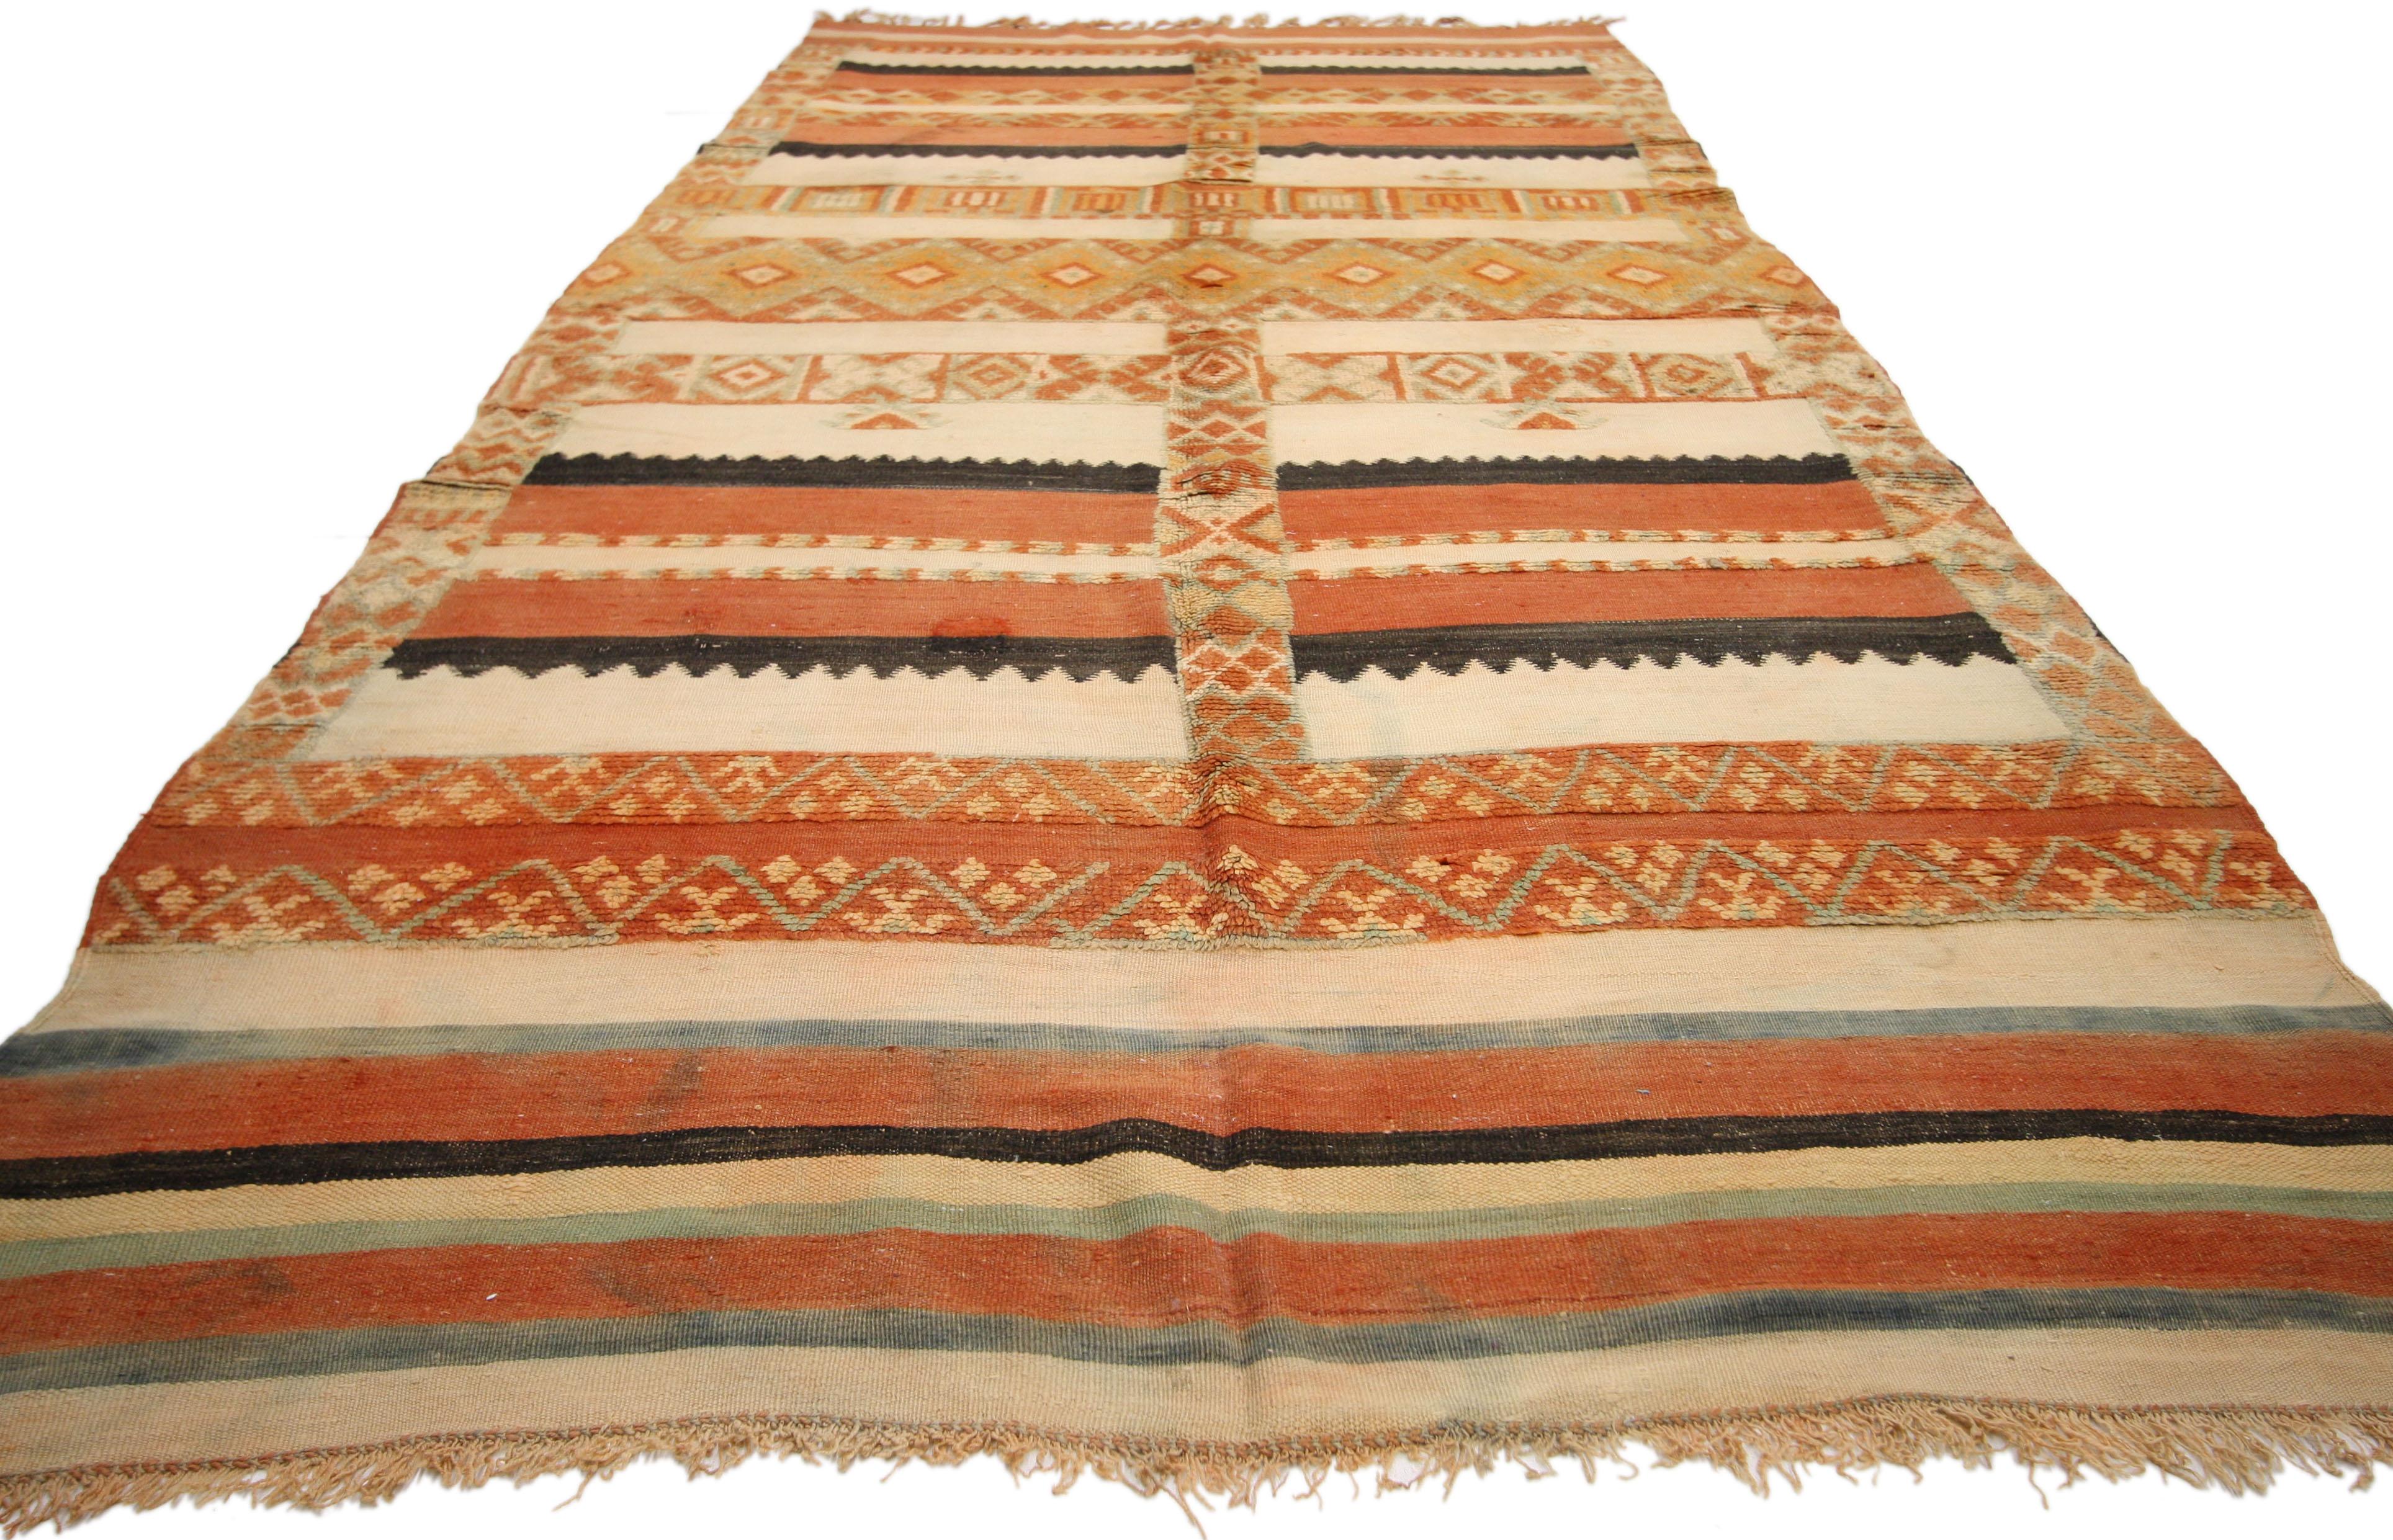 Mid-Century Modern Style Vintage Moroccan Striped Kilim Rug with High-Low Pile In Distressed Condition For Sale In Dallas, TX